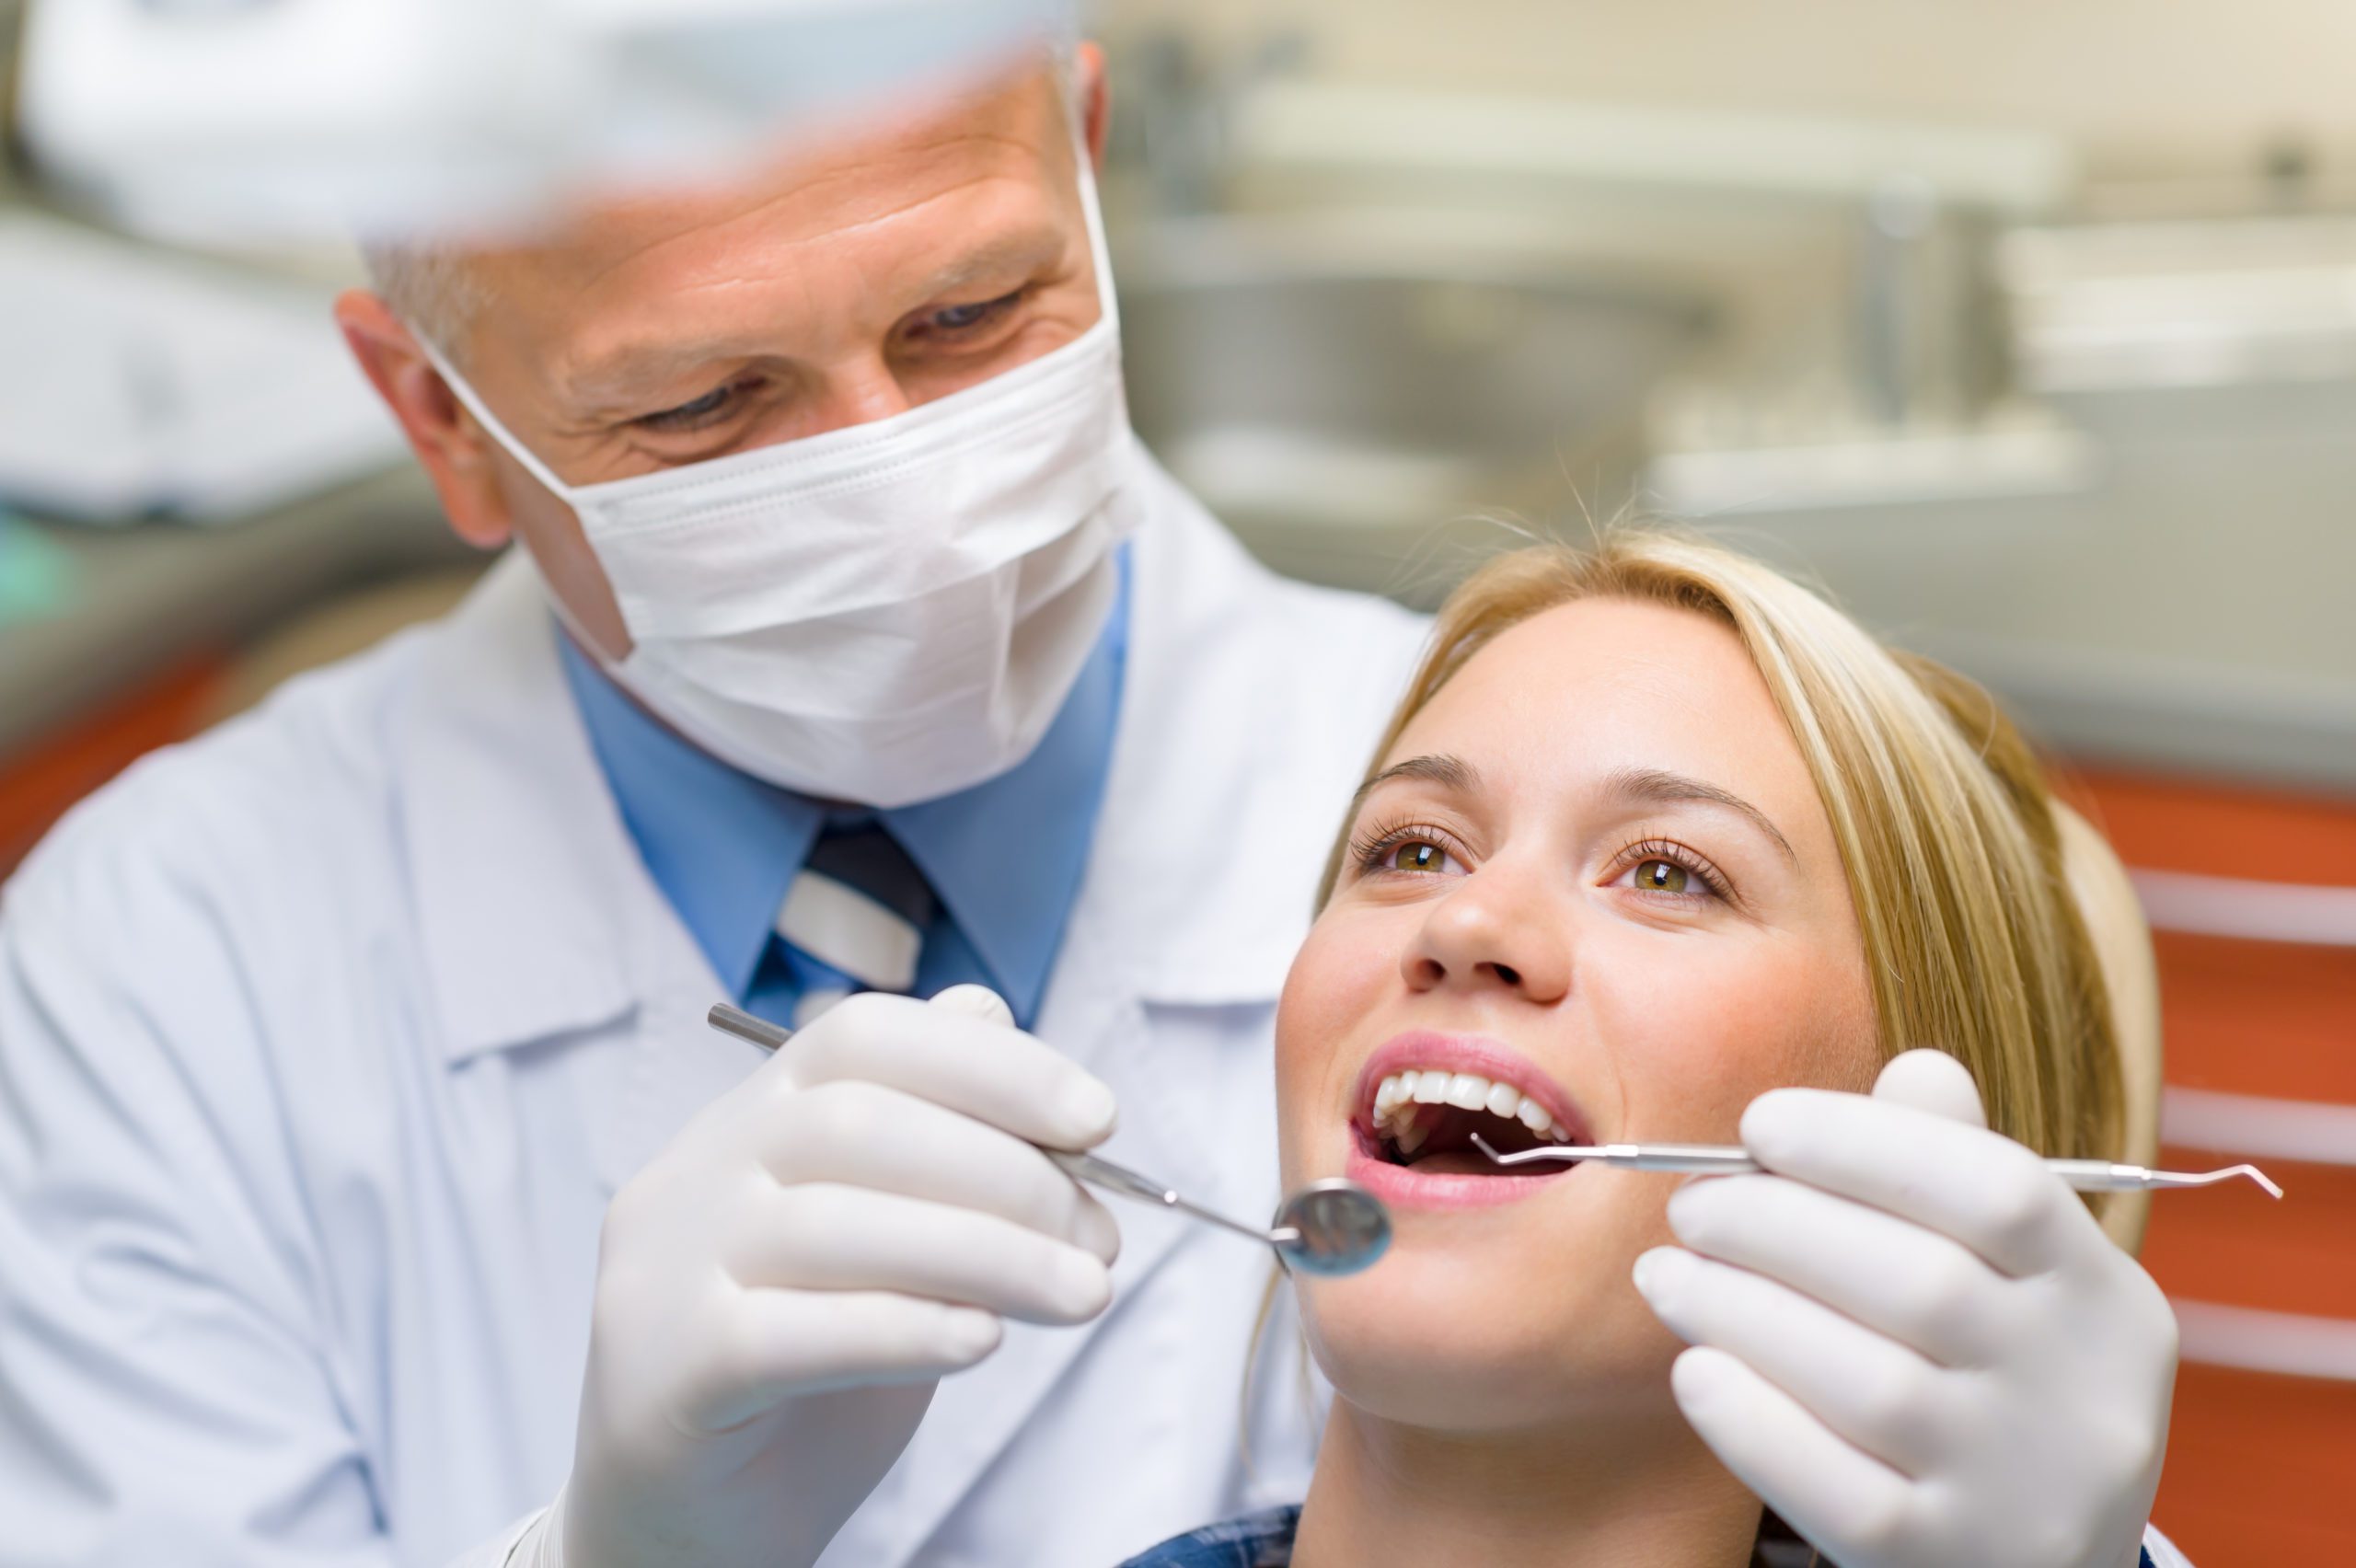 Healthy teeth patient at dentist office dental caries prevention - Orthodontic services during a health crisis